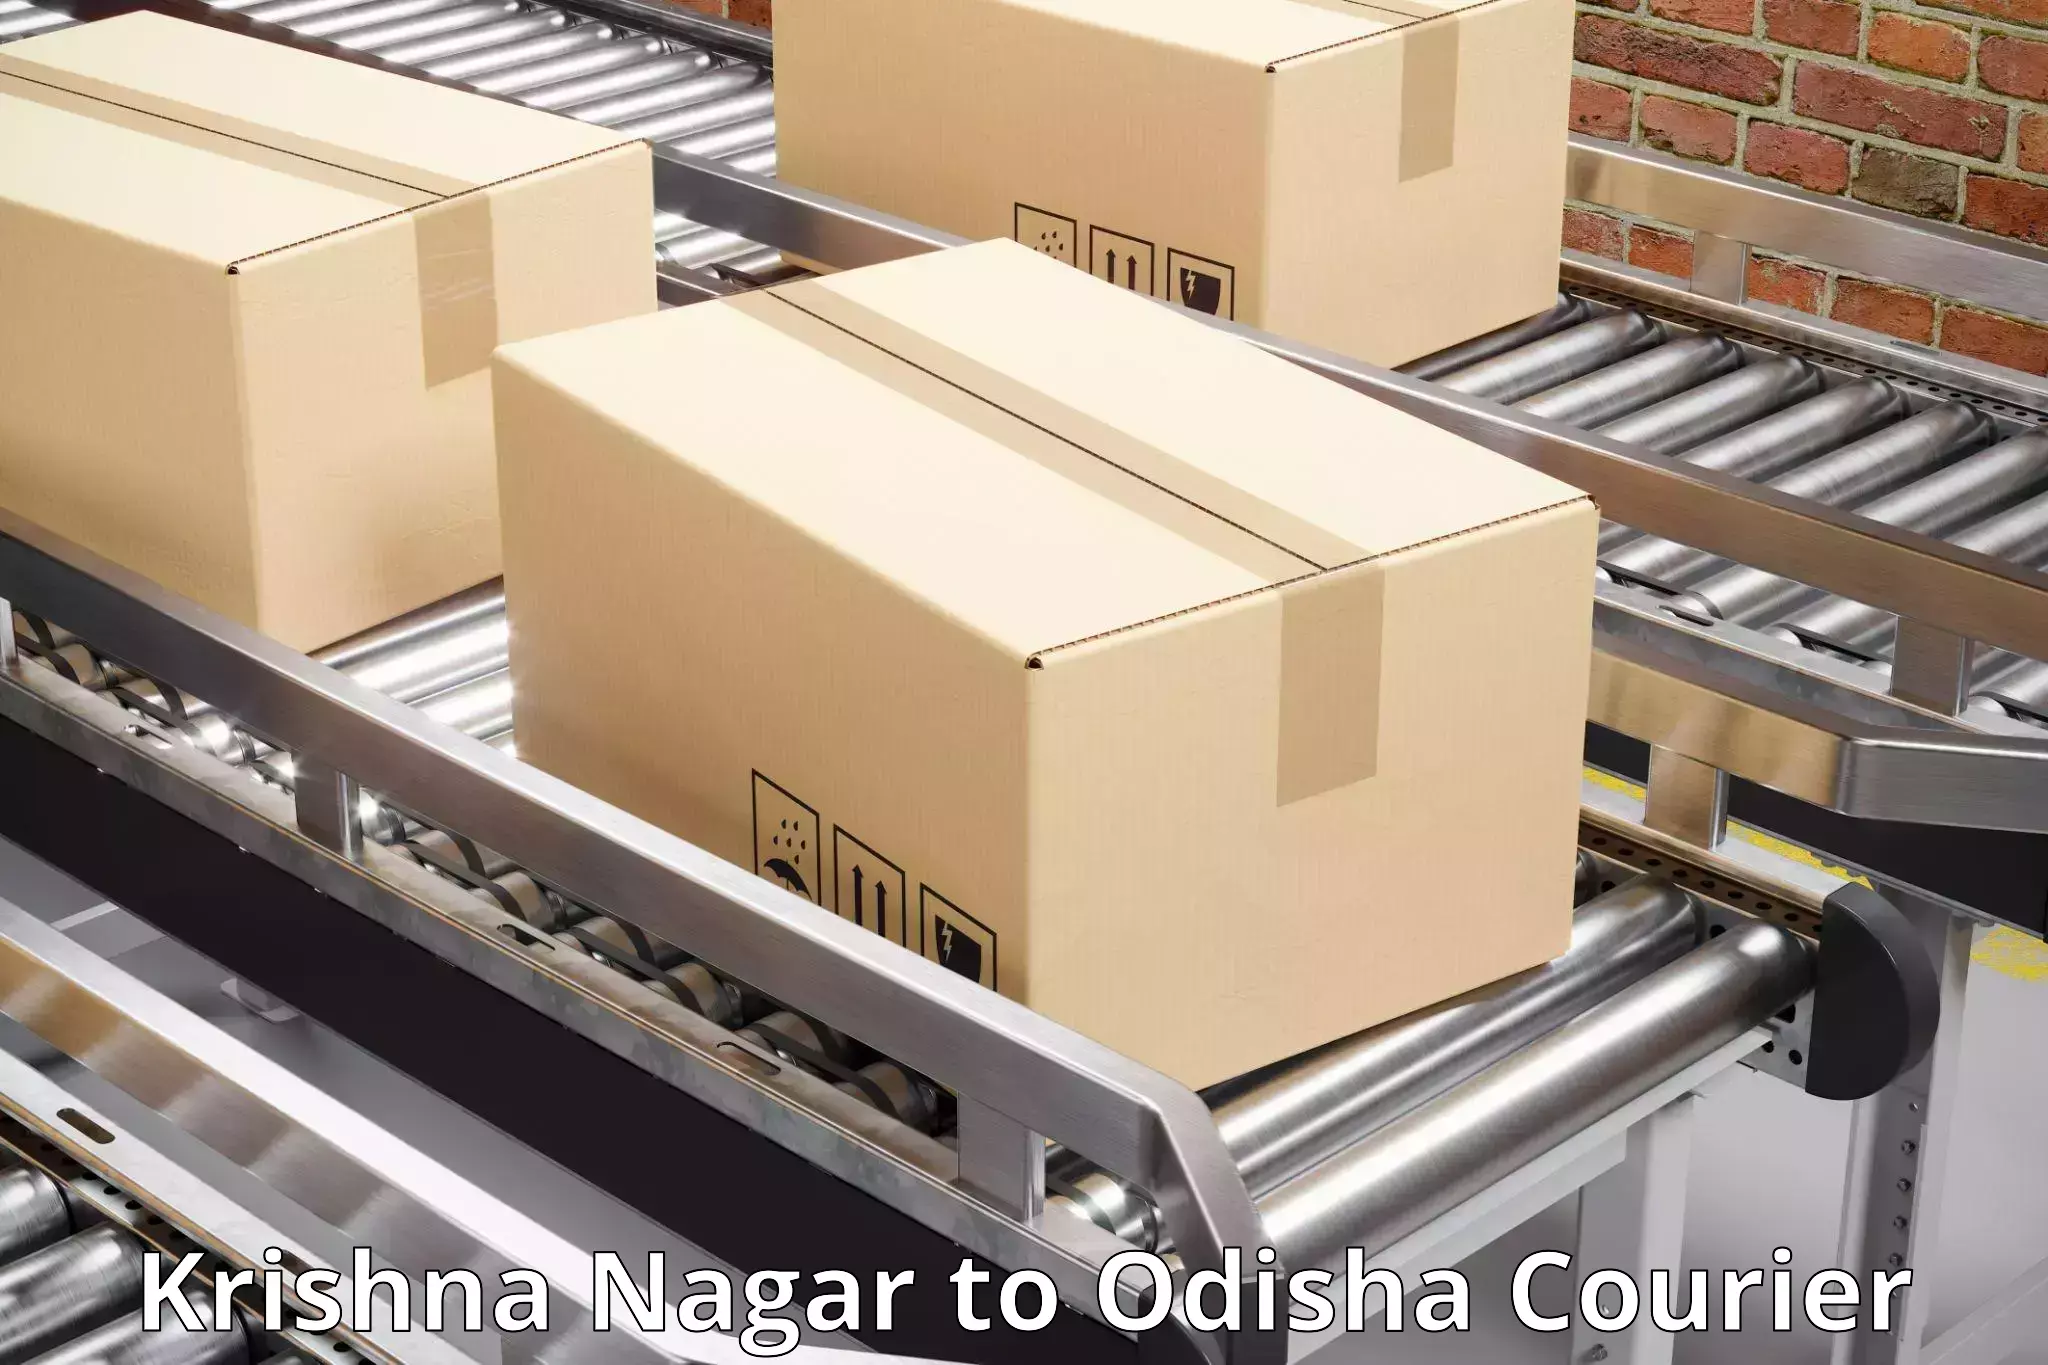 Sustainable delivery practices Krishna Nagar to Kotapad